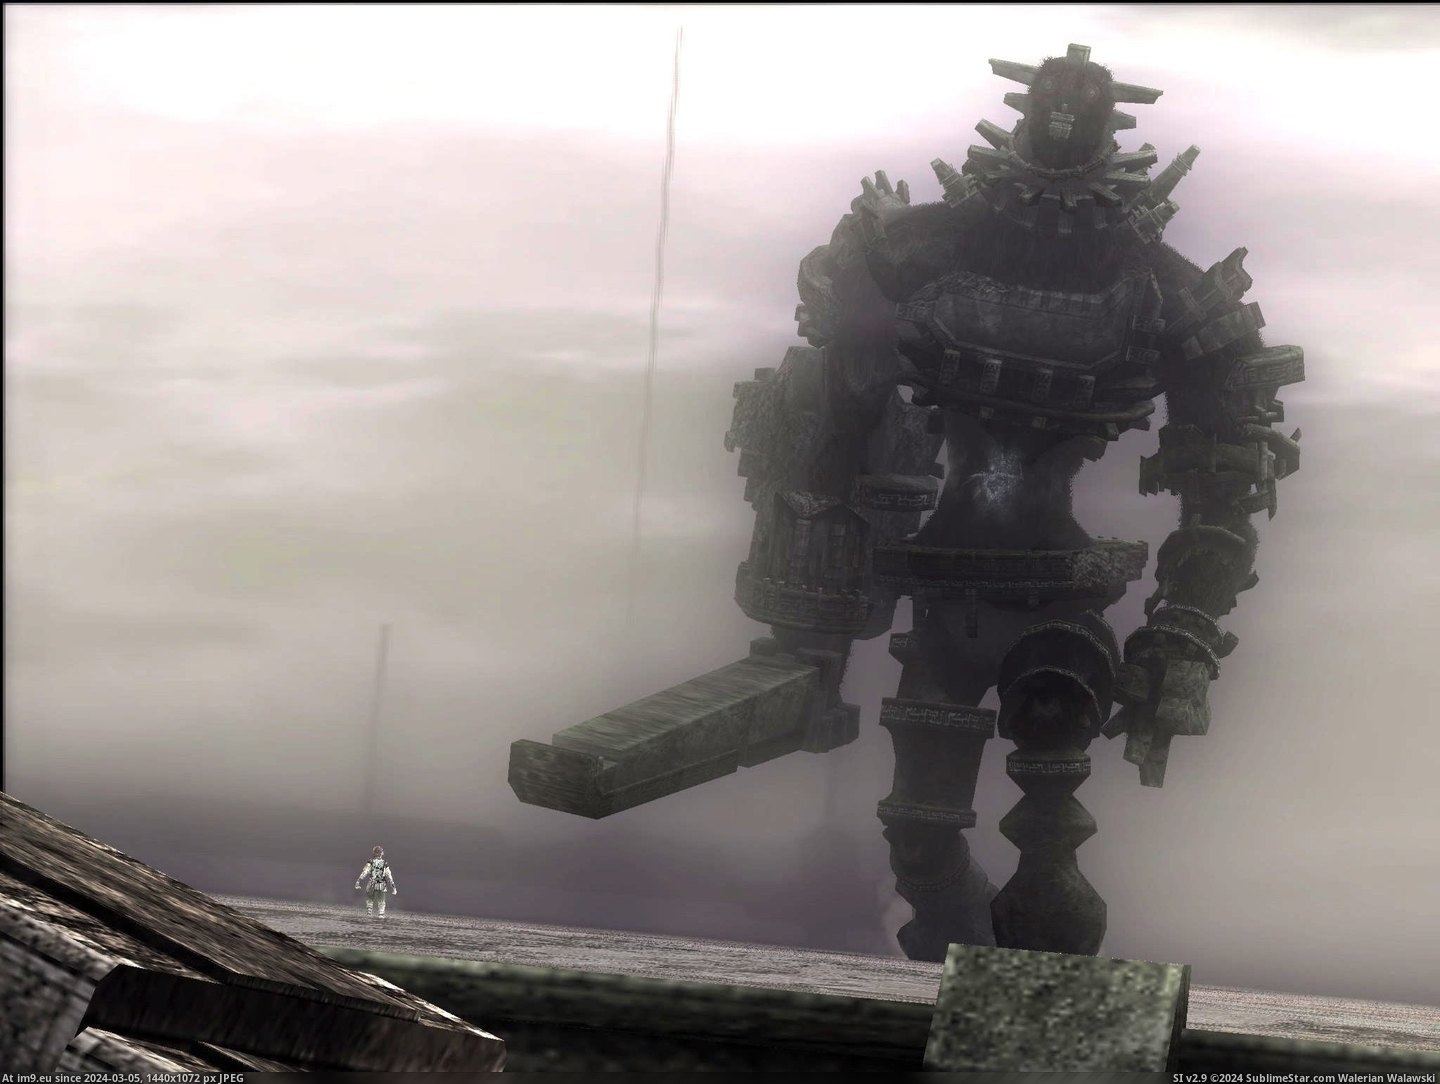 #Game #Shadow #Colossus #Video Video Game Shadow Of The Colossus 5657 Pic. (Bild von album Games Wallpapers))